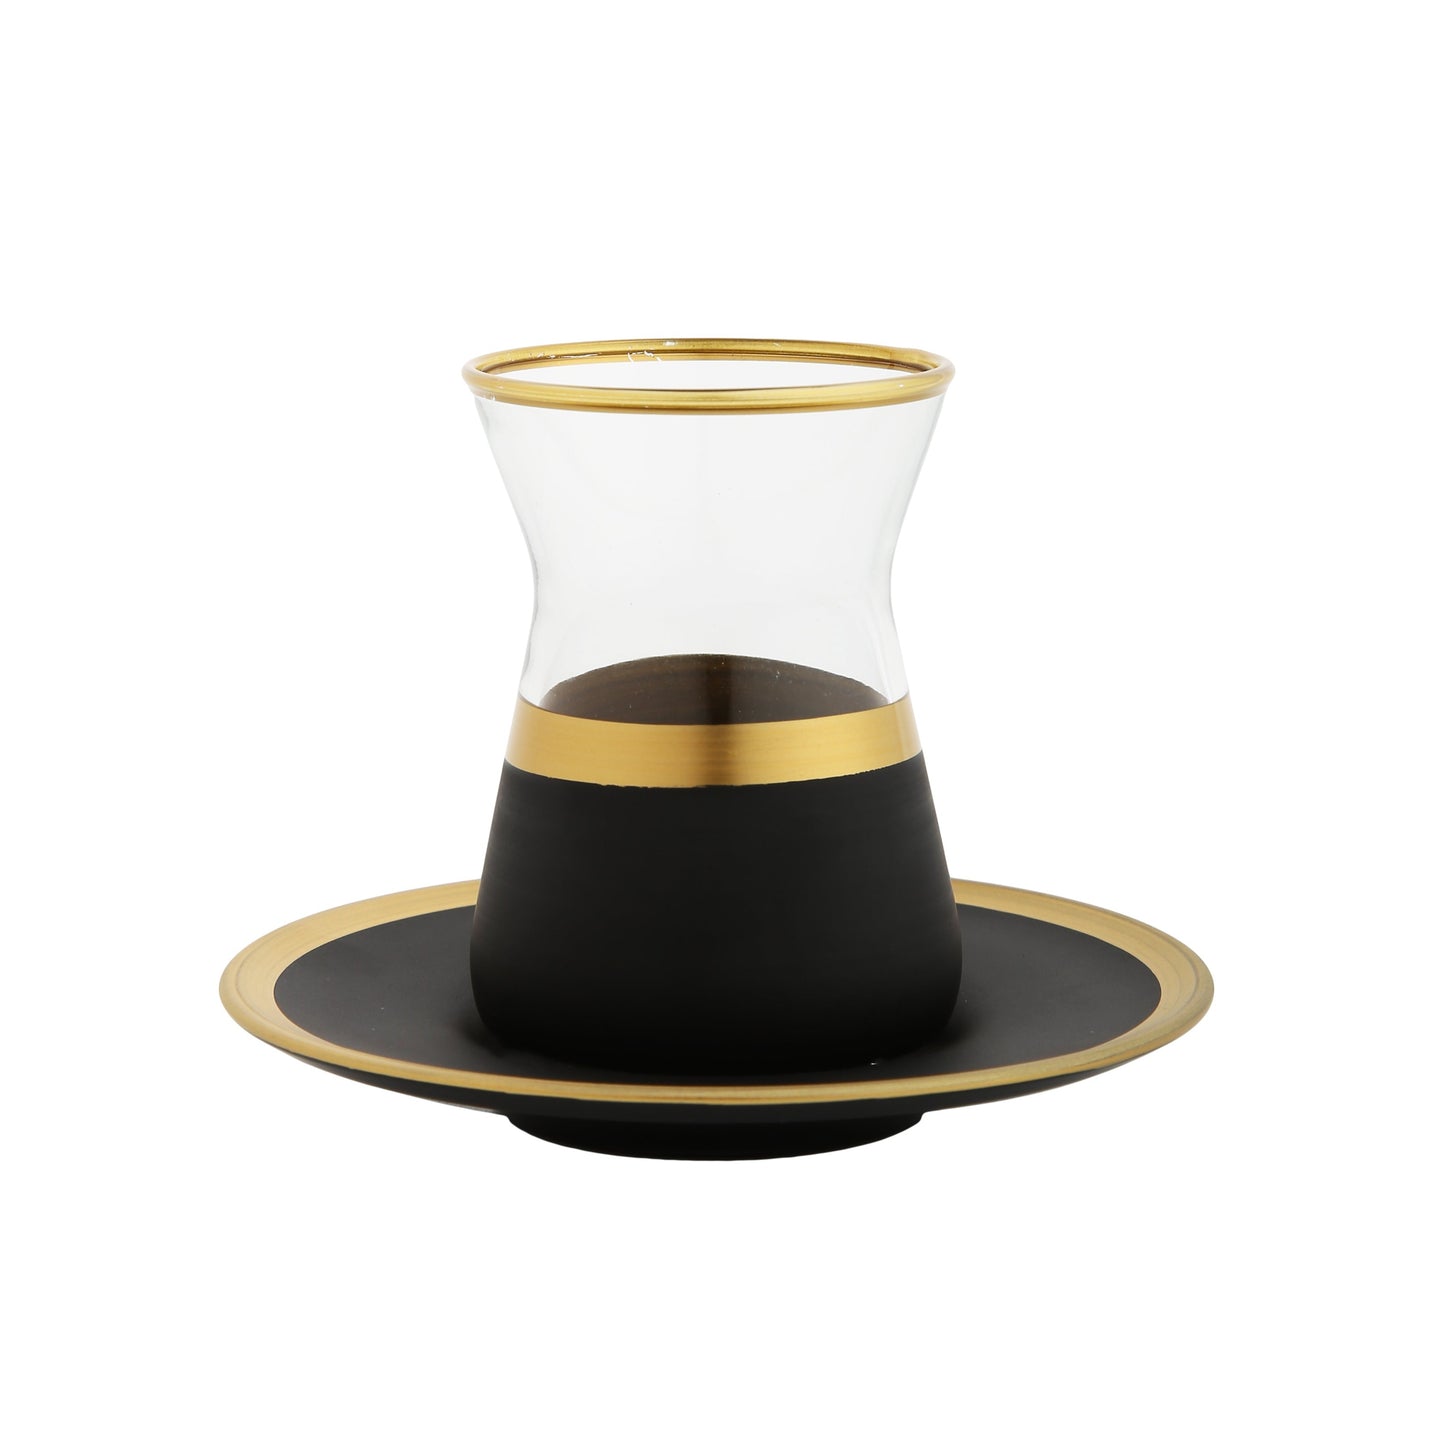 Set of 6 Tea Cups and Saucers with Black and Gold Design